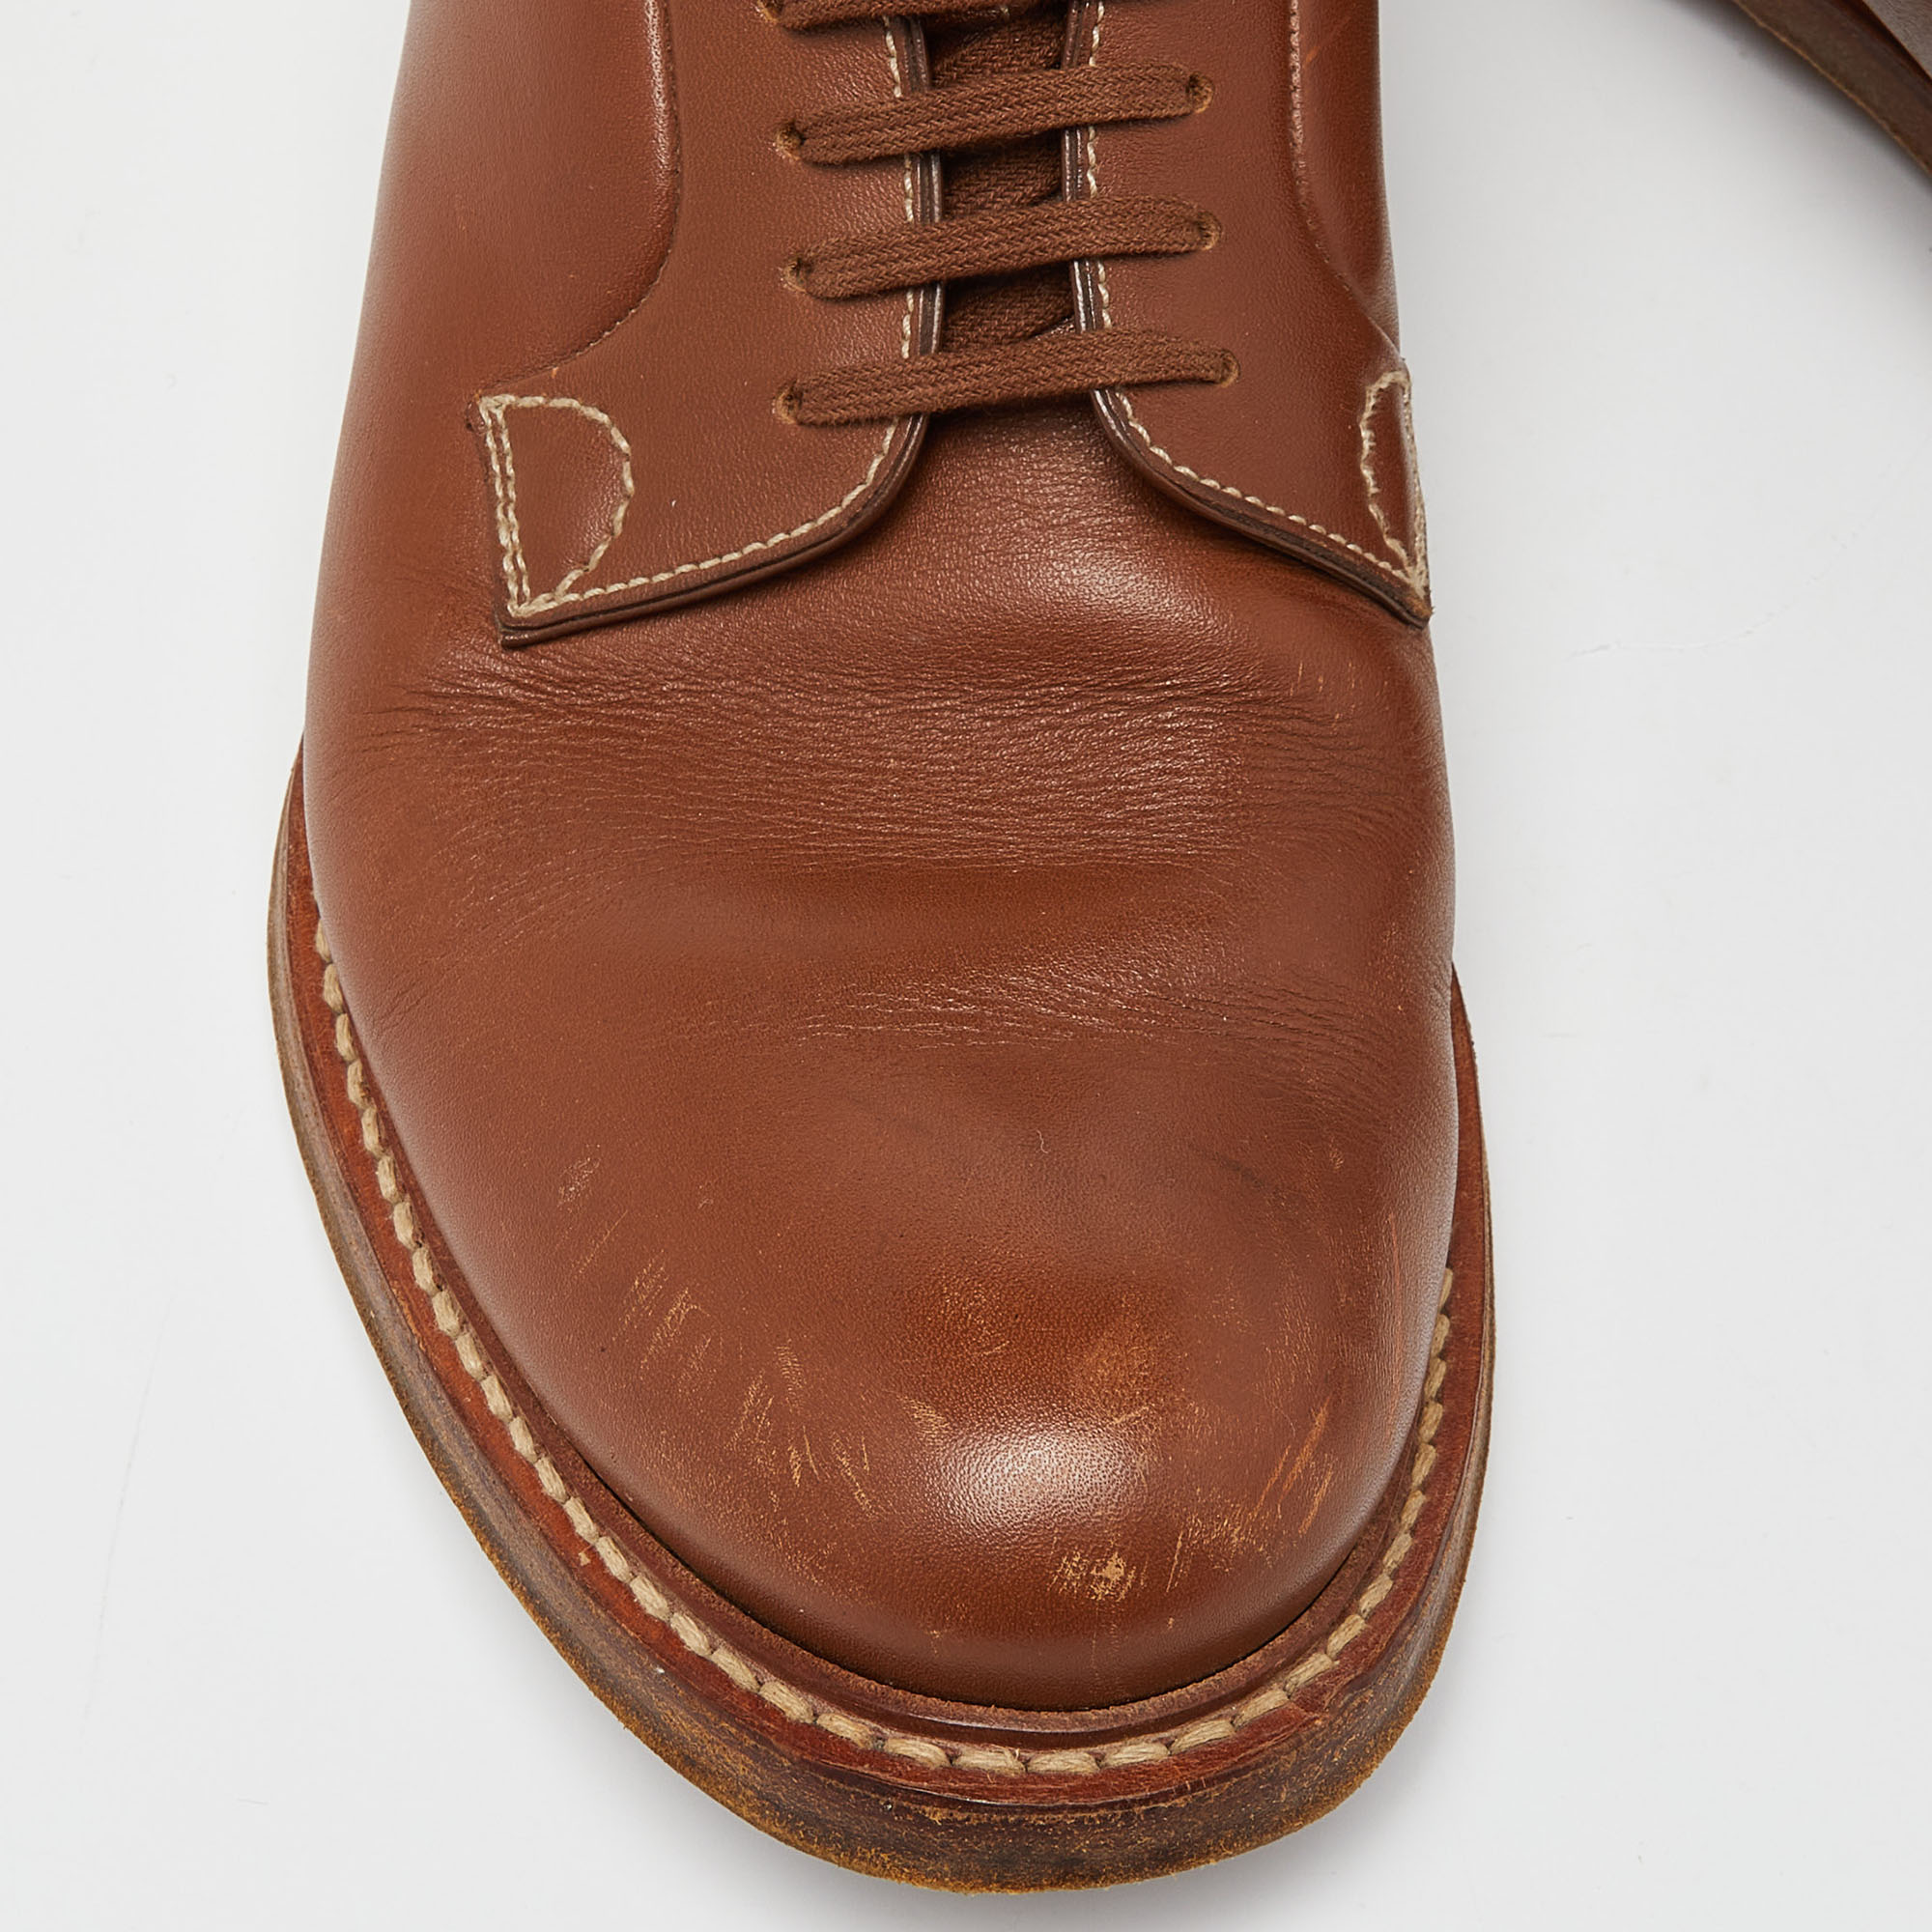 Prada Brown Leather Lace Up Derby Size 43.5